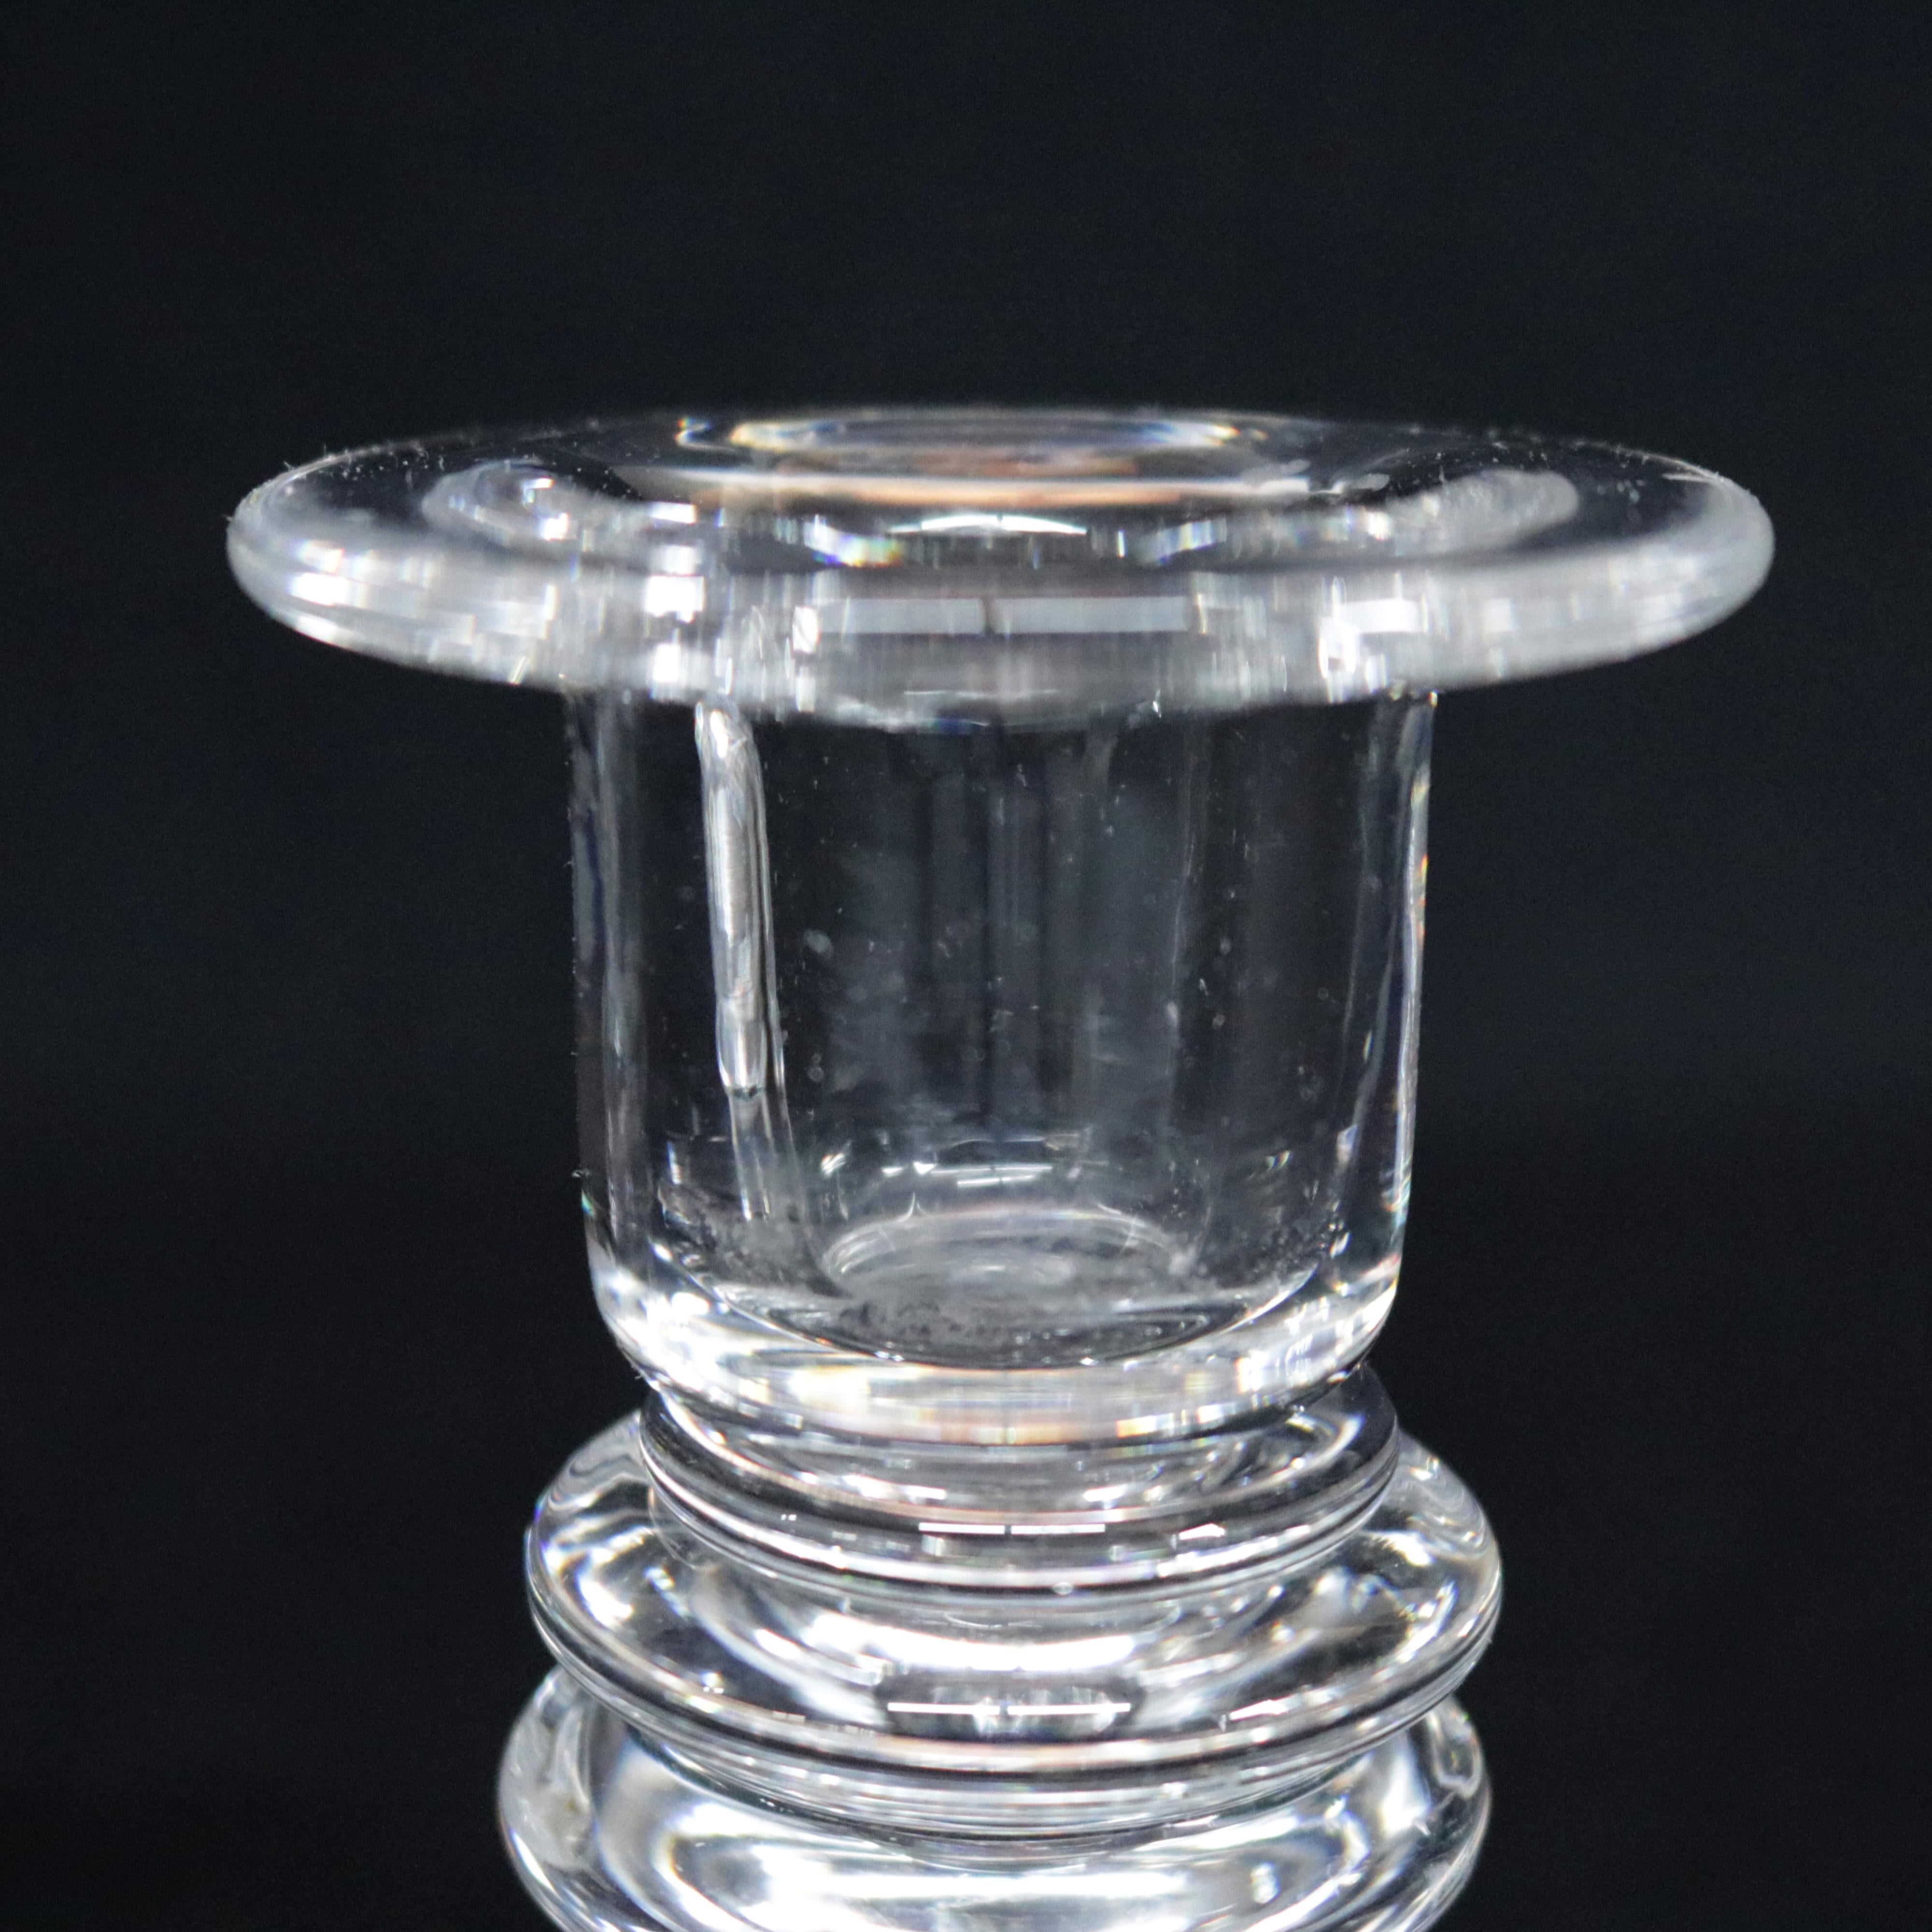 20th Century Steuben Figurative Crystal Tear Drop Baluster Low Candlesticks by Hills, Signed